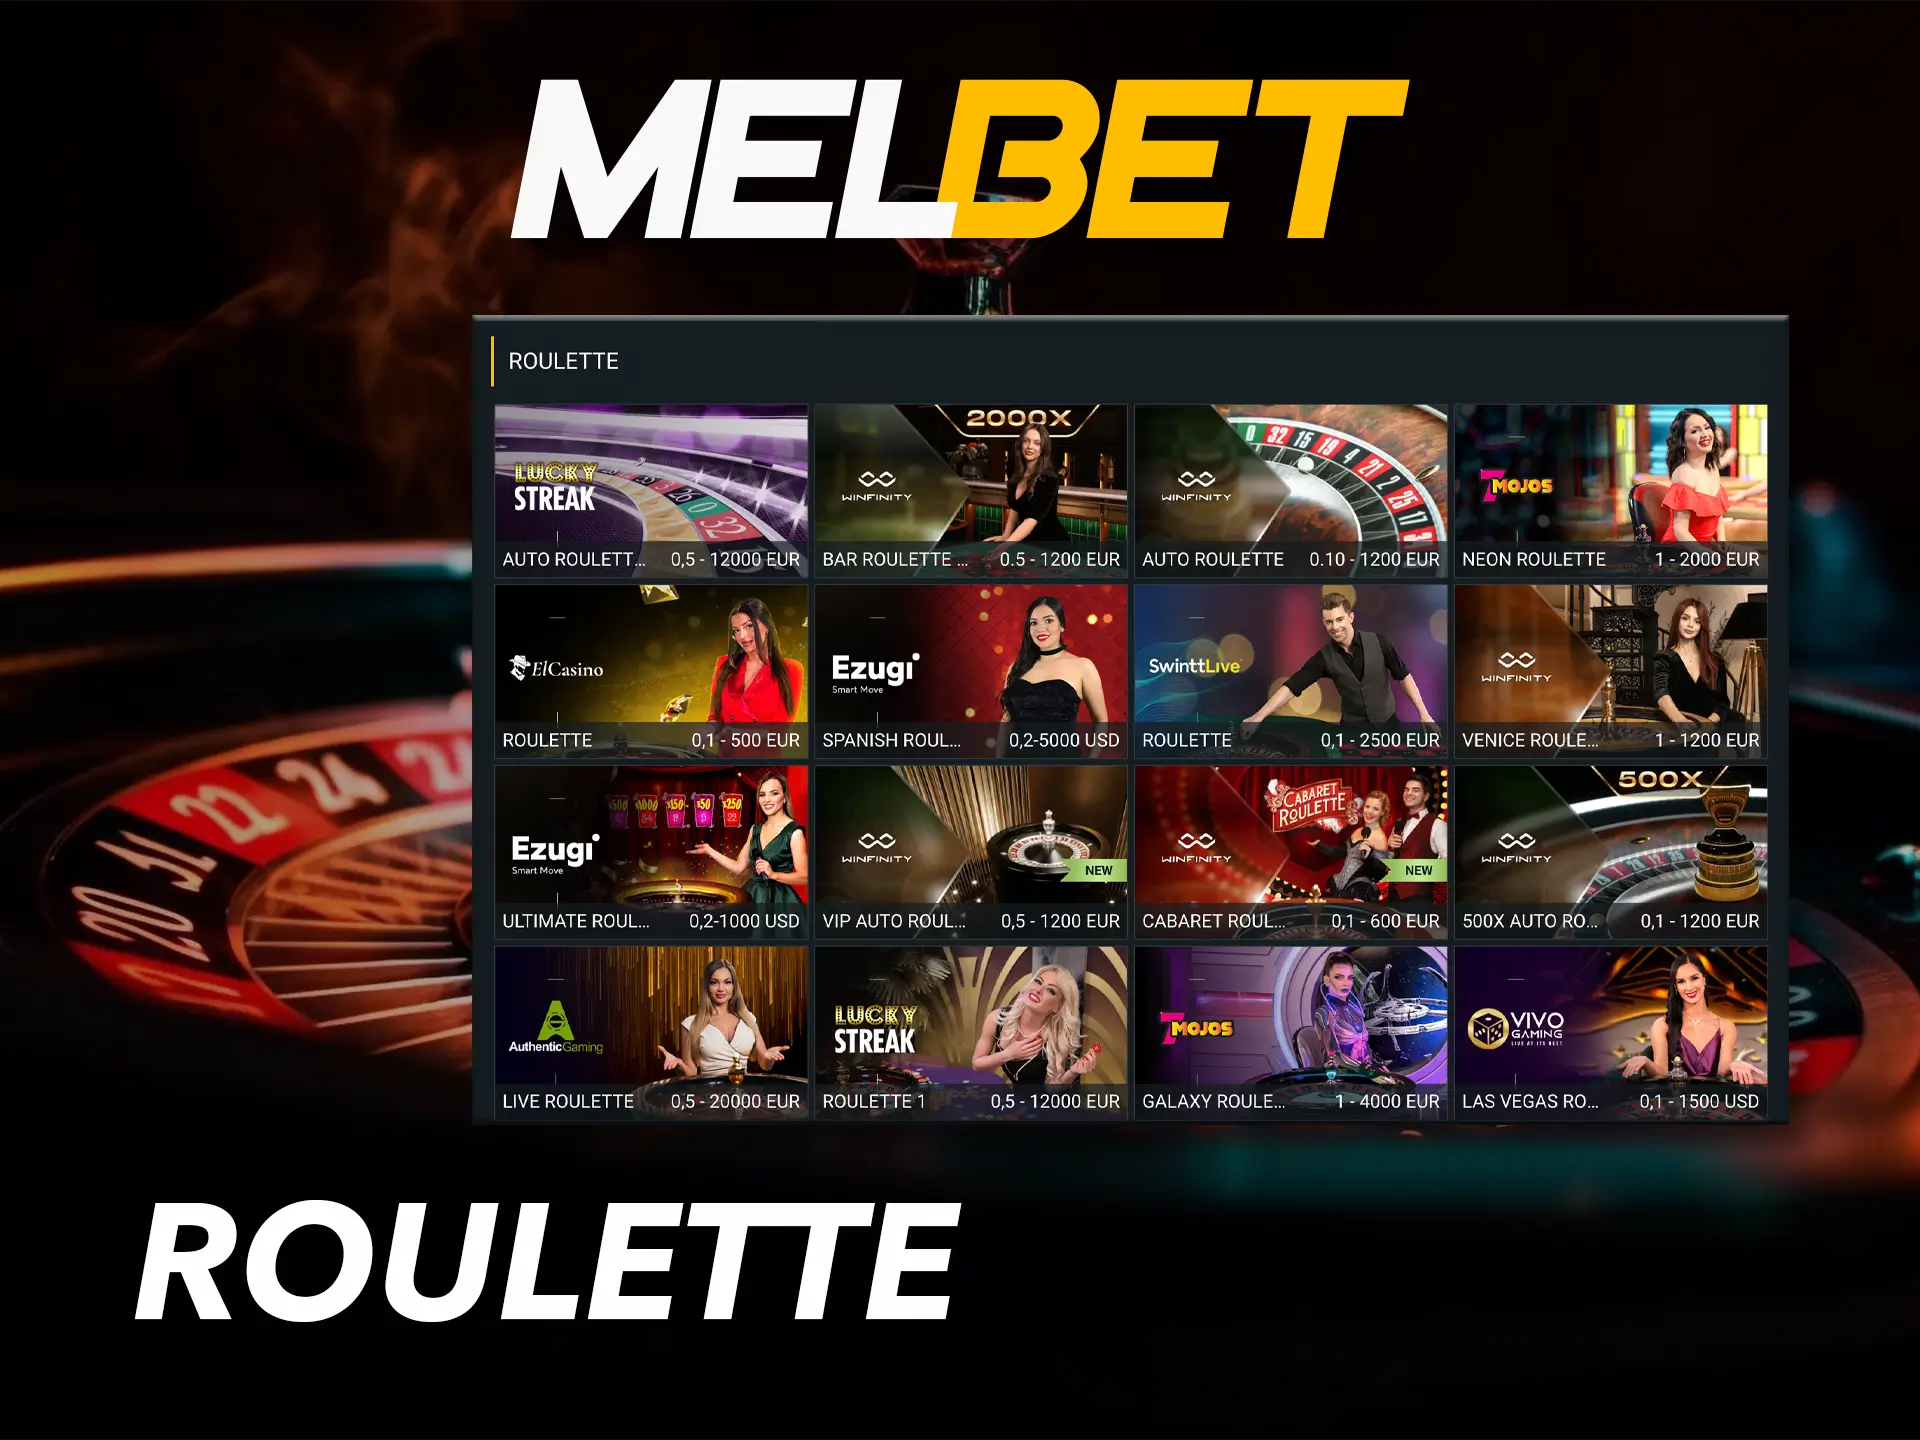 Experience the excitement of roulette from Melbet.